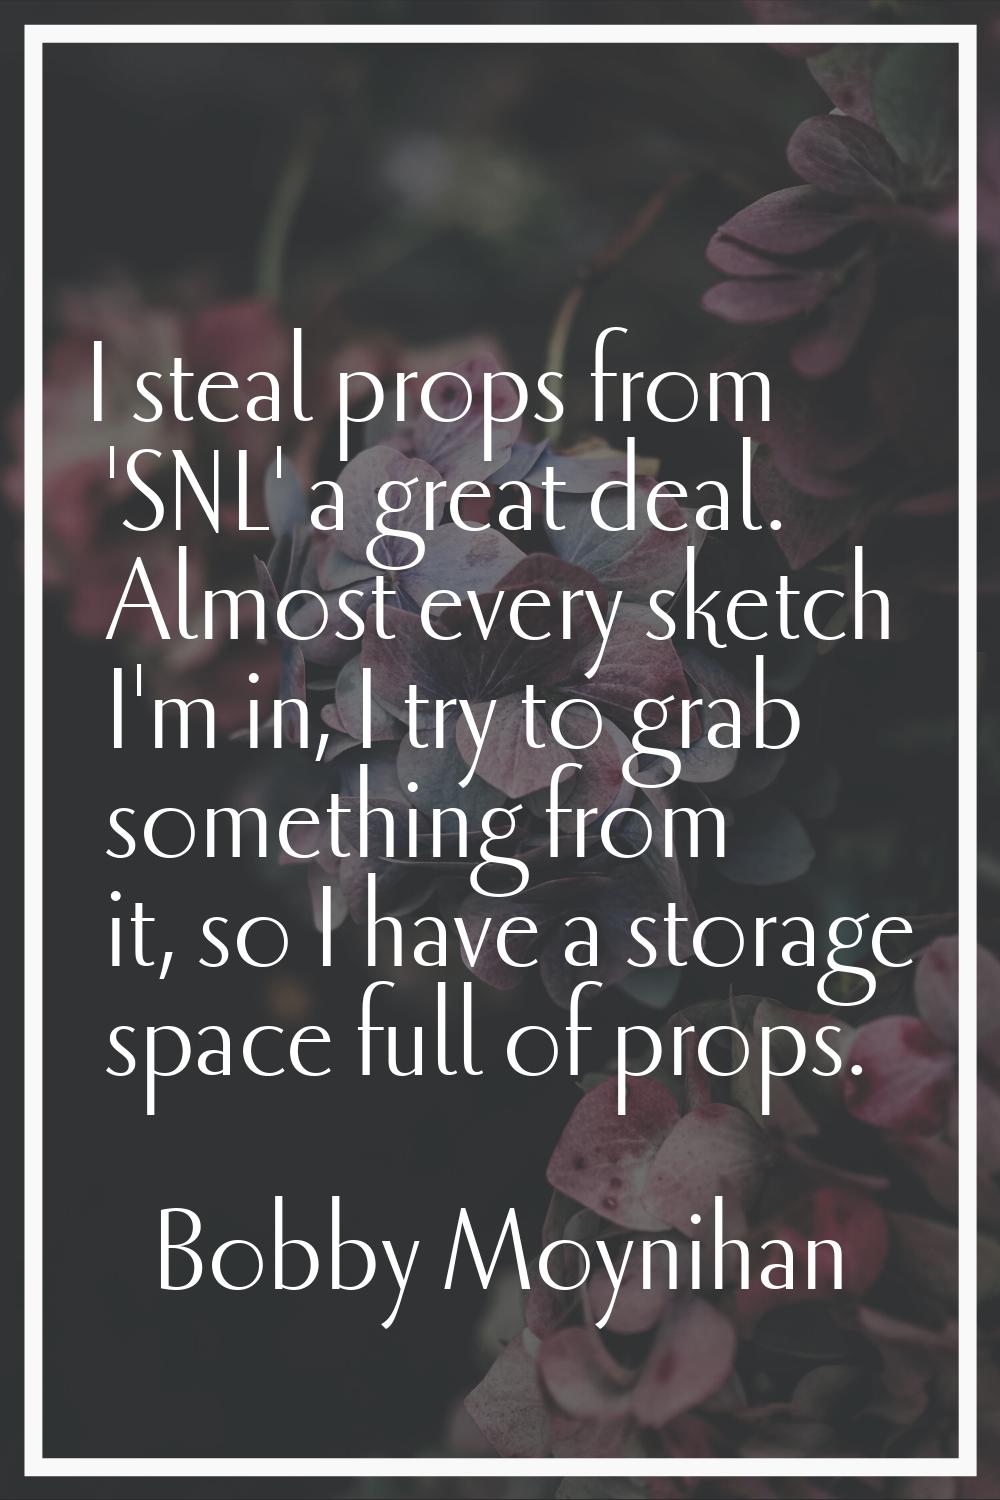 I steal props from 'SNL' a great deal. Almost every sketch I'm in, I try to grab something from it,